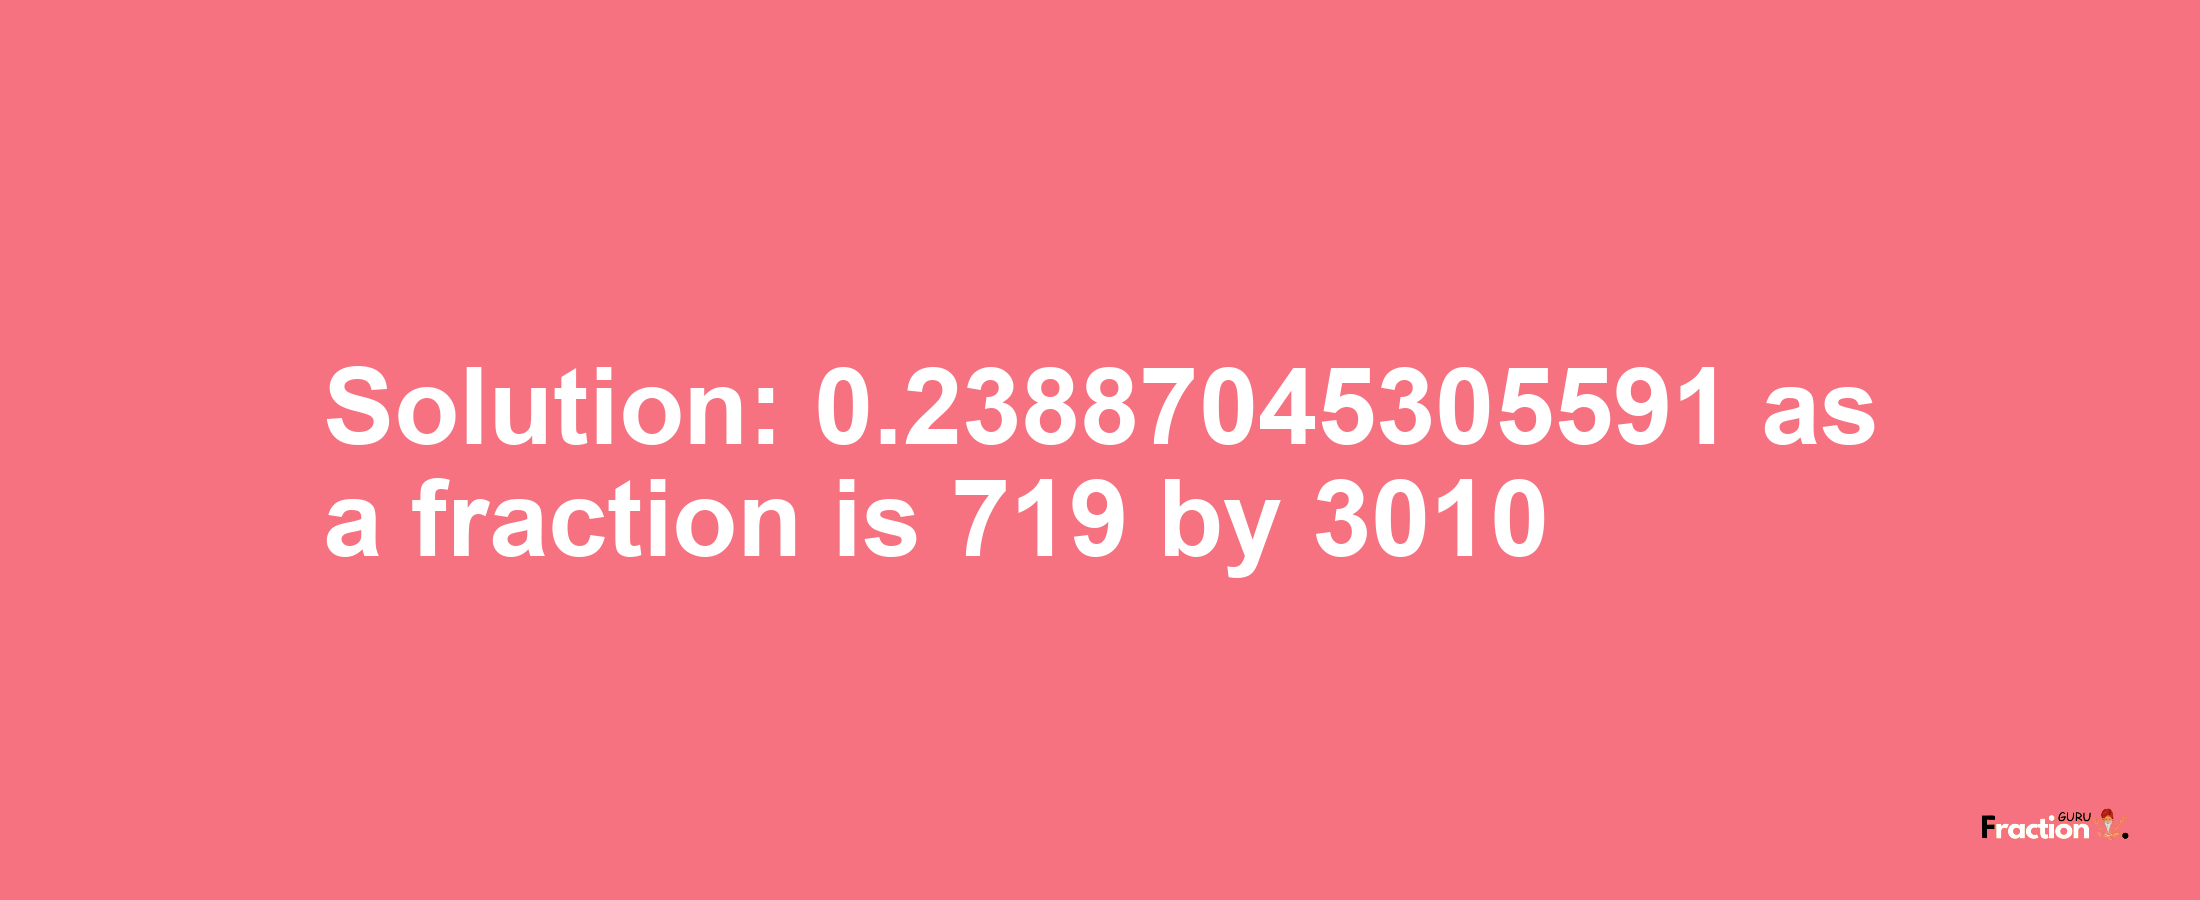 Solution:0.23887045305591 as a fraction is 719/3010